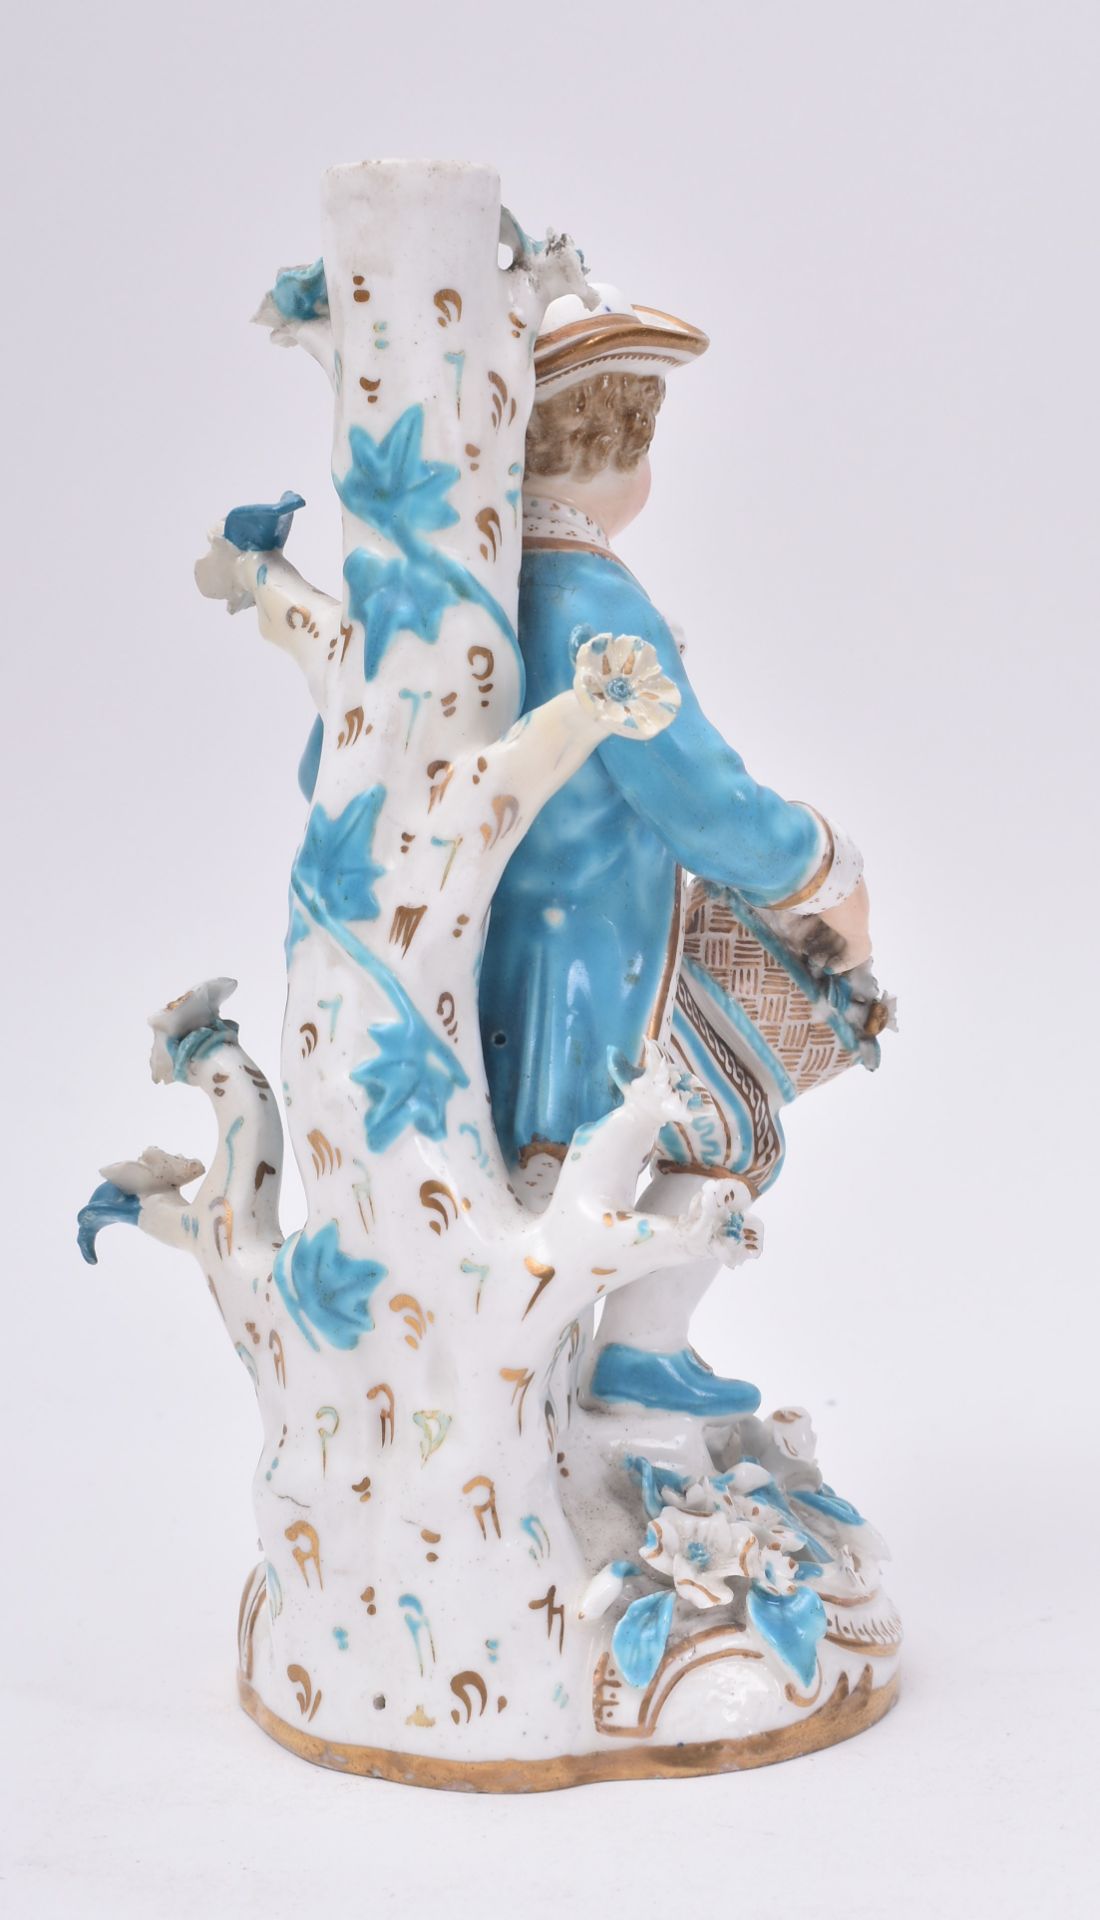 EARLY 19TH CENTURY CONTINENTAL GERMAN PORCELAIN FIGURE - Image 2 of 7